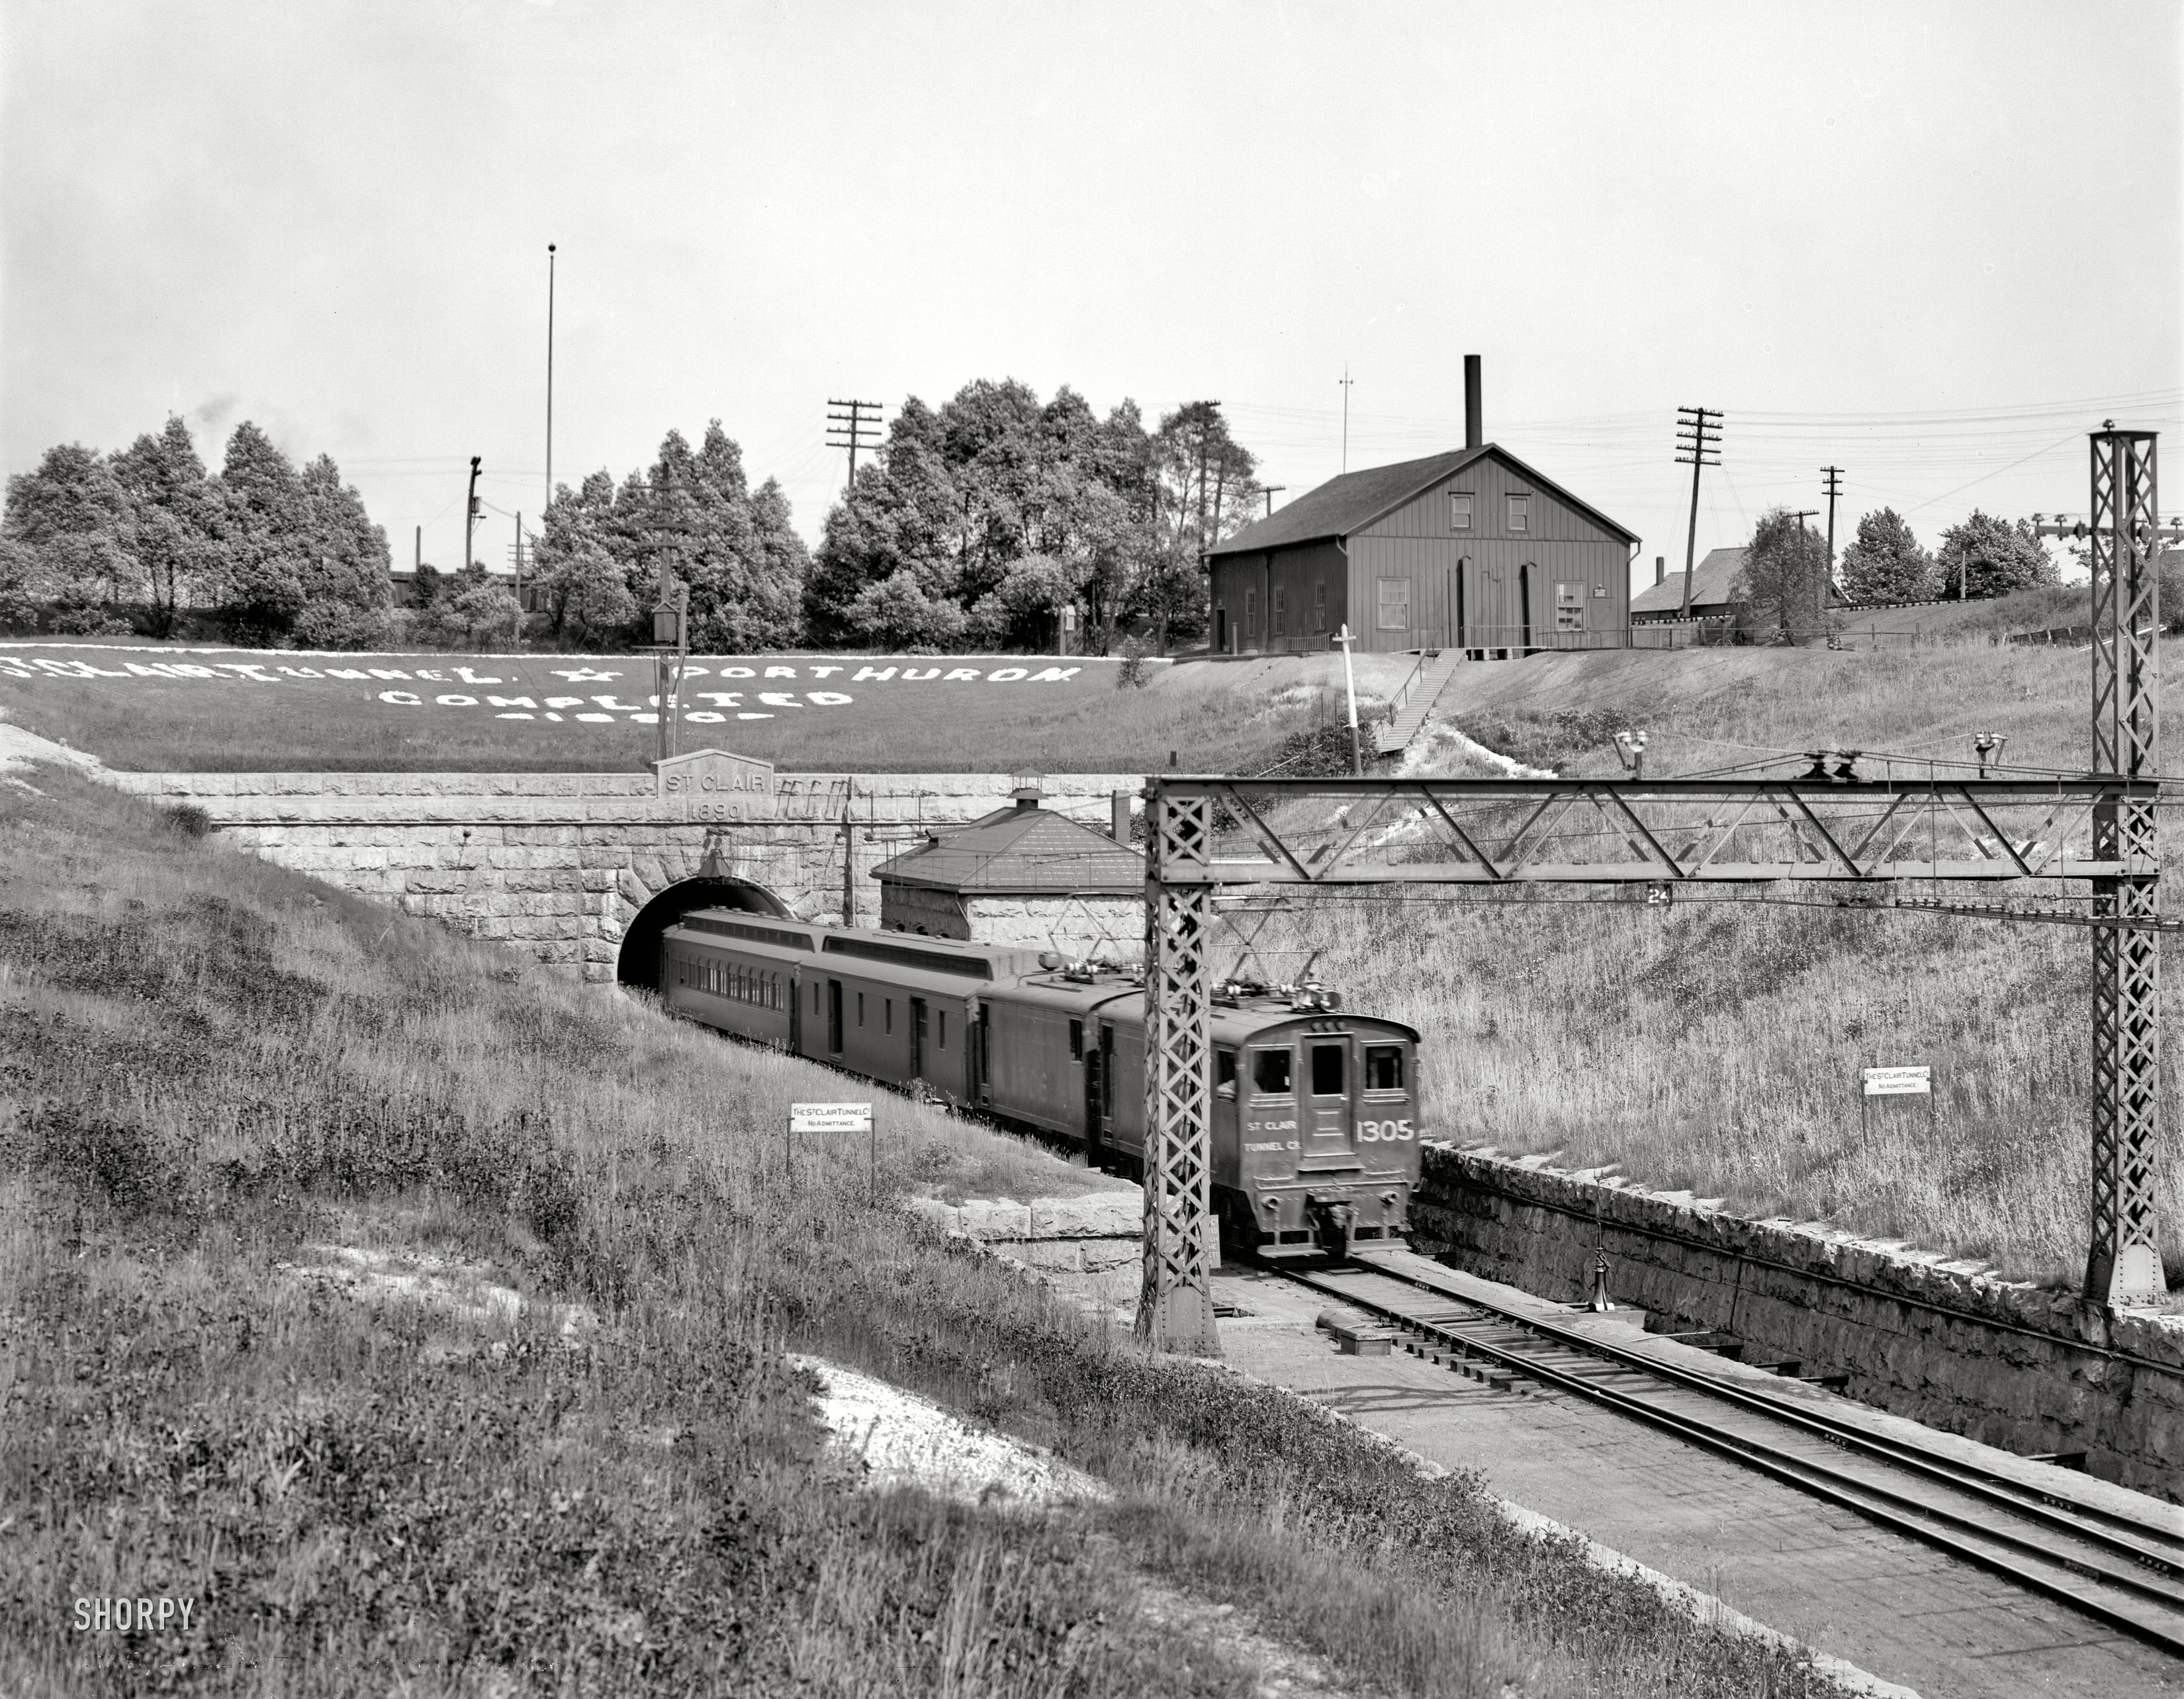 Port Huron, Michigan, circa 1905. "St. Clair Tunnel." Oh, and please note: "No Admittance." 8x10 inch glass negative, Detroit Publishing Co. View full size.